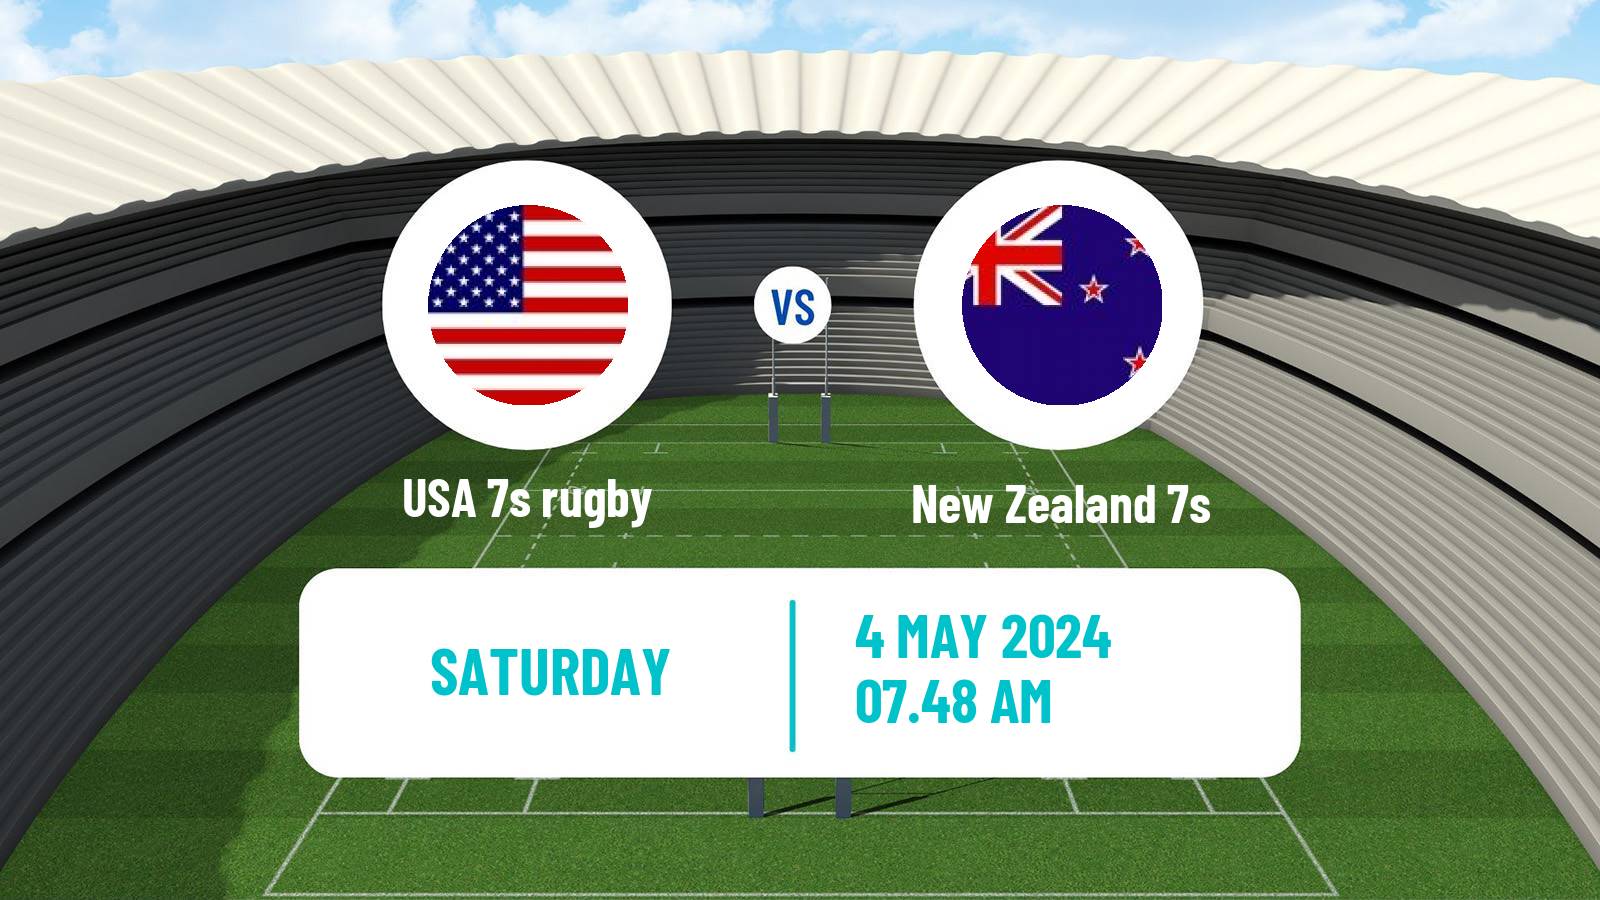 Rugby union Sevens World Series - Singapore USA 7s - New Zealand 7s